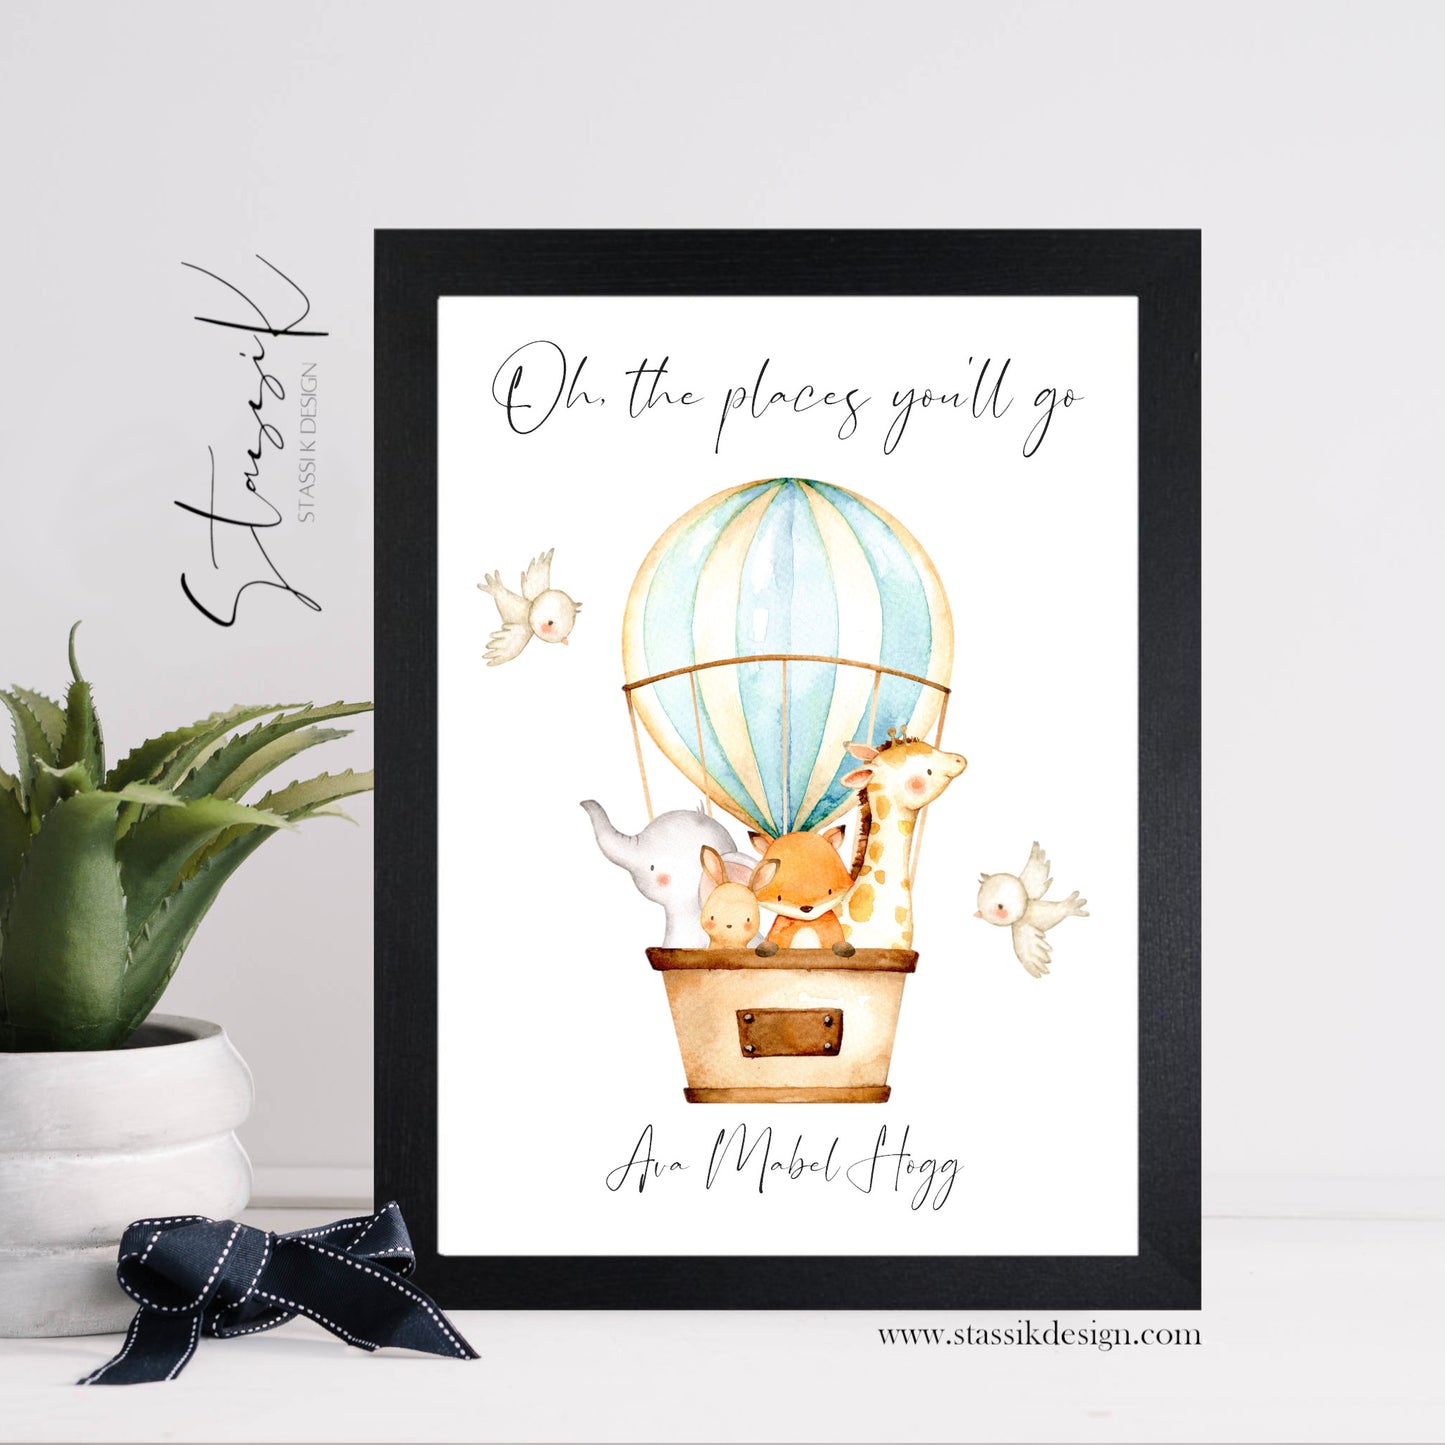 Personalised Nursery Print - 'Oh the places you'll go' - Blue